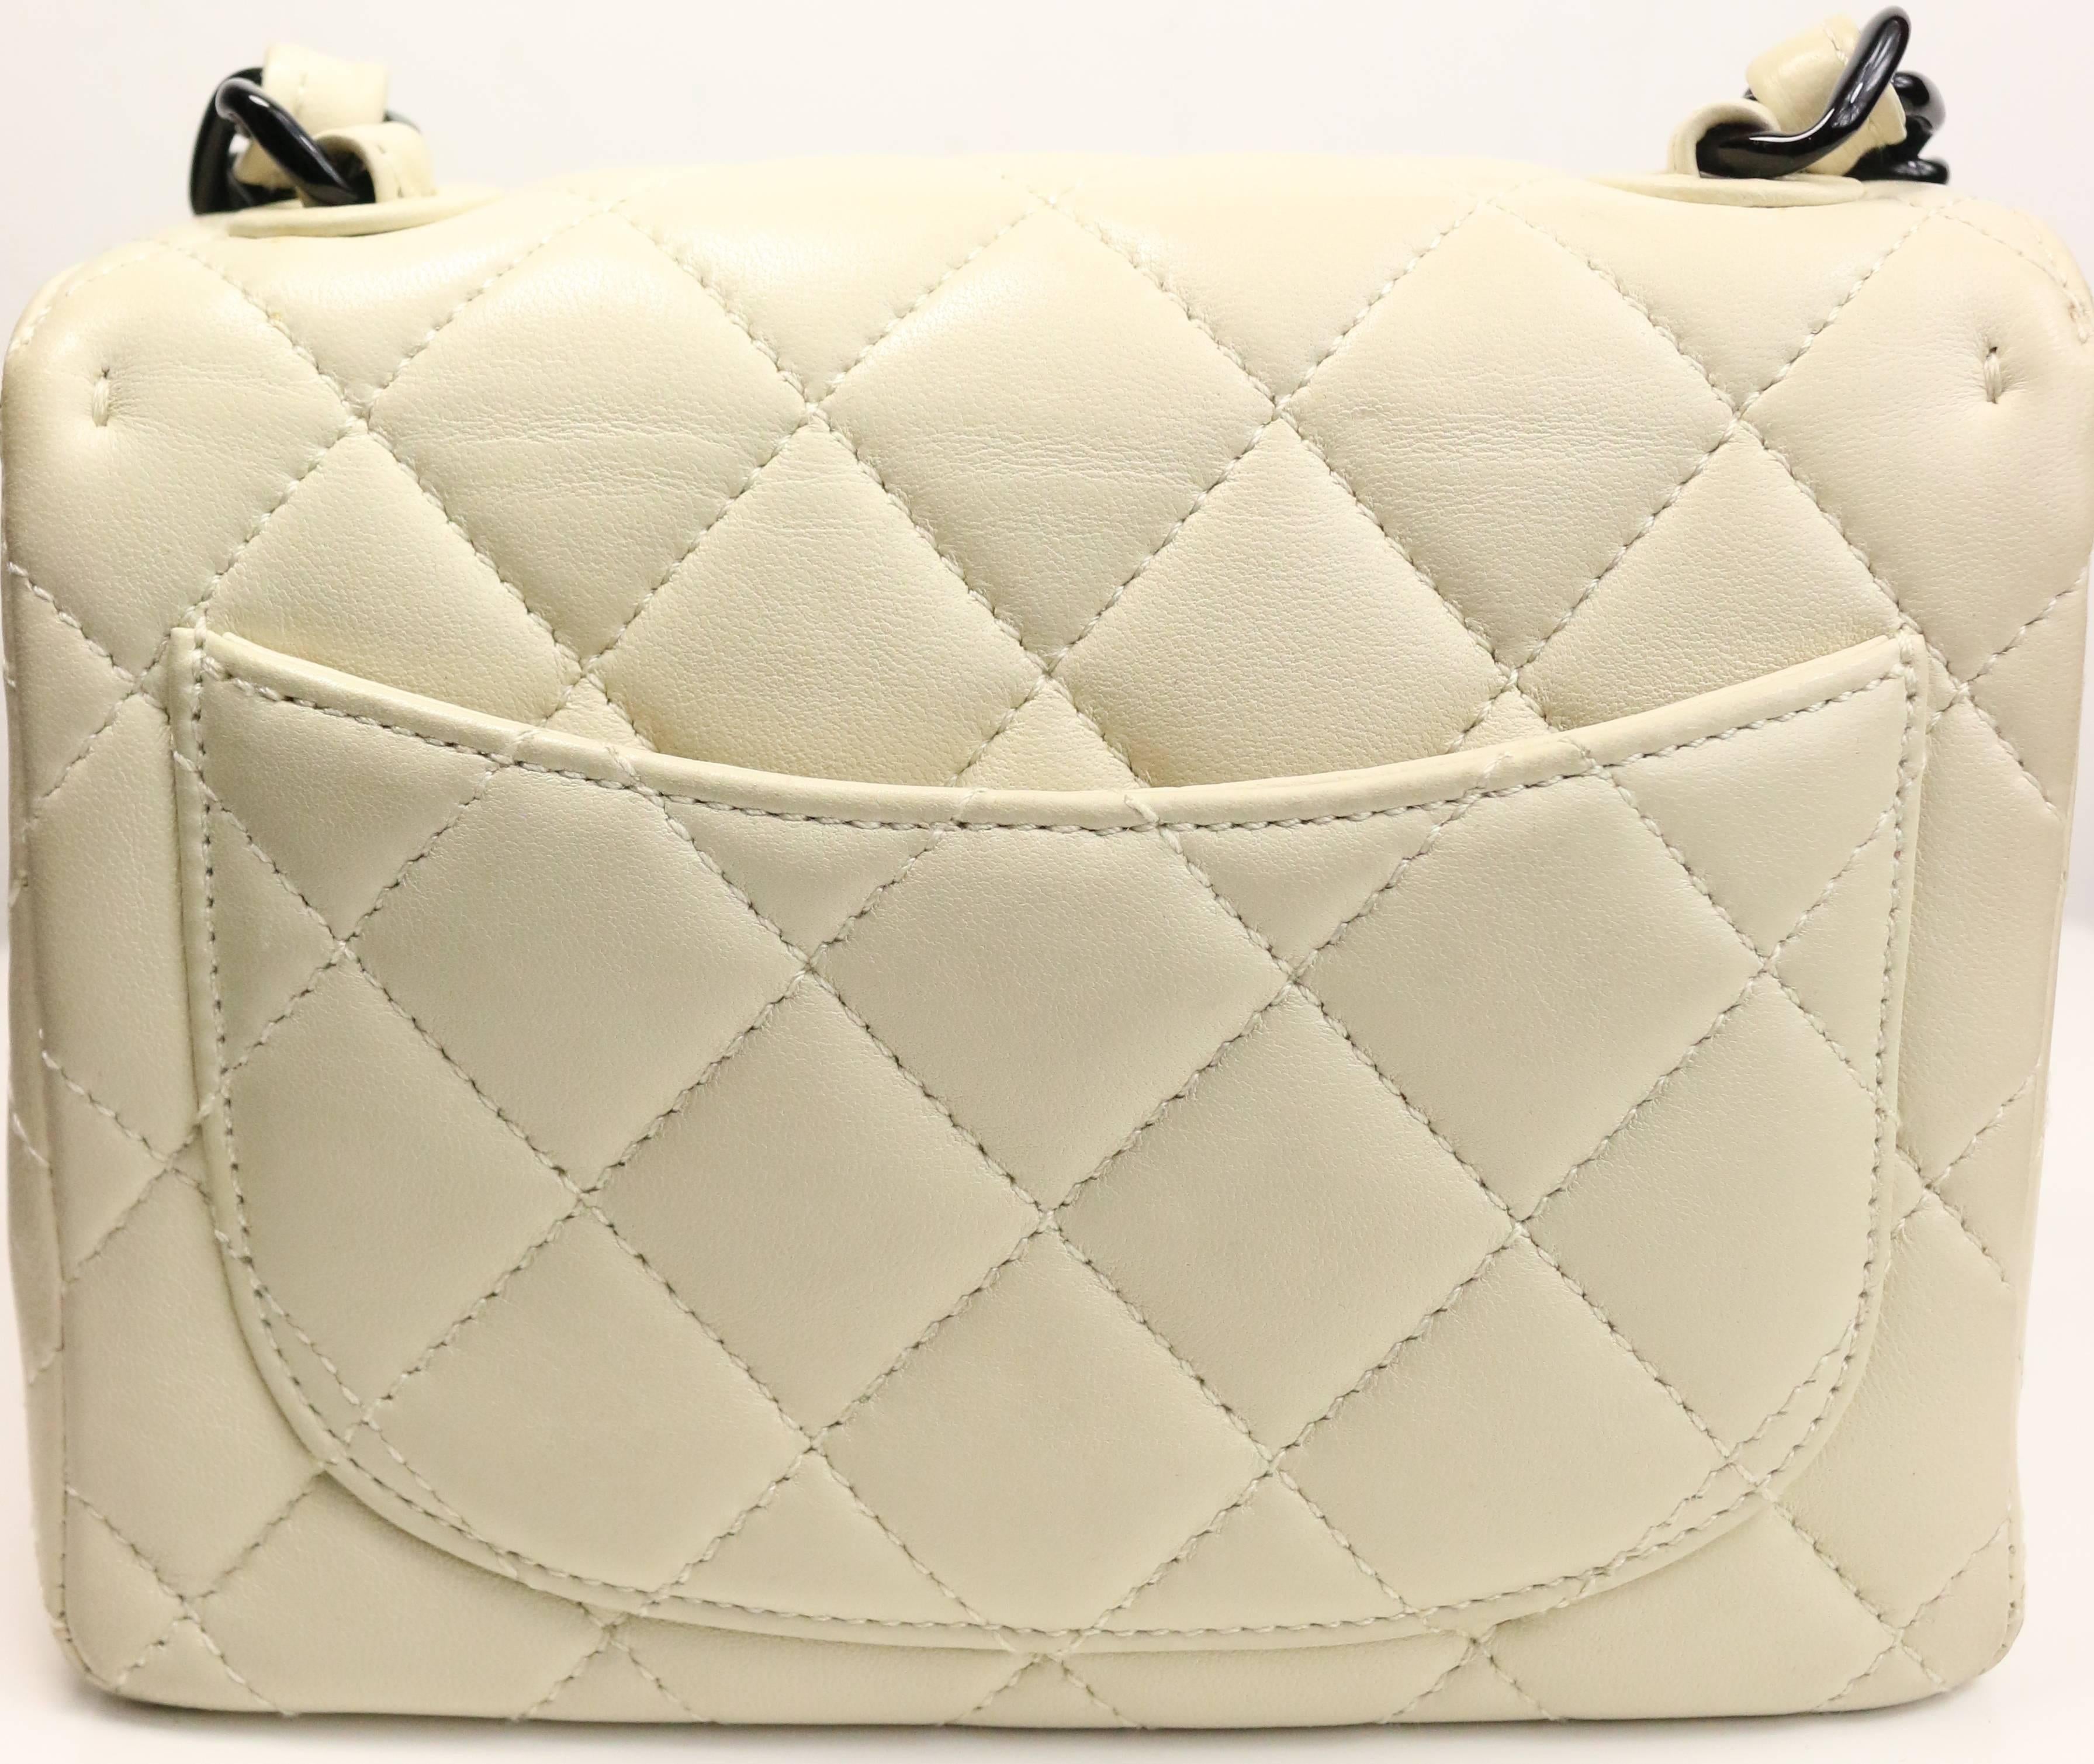 Beige Chanel Vanilla Quilted Lambskin Leather with Black Vinyl Chain Mini Flap Bag